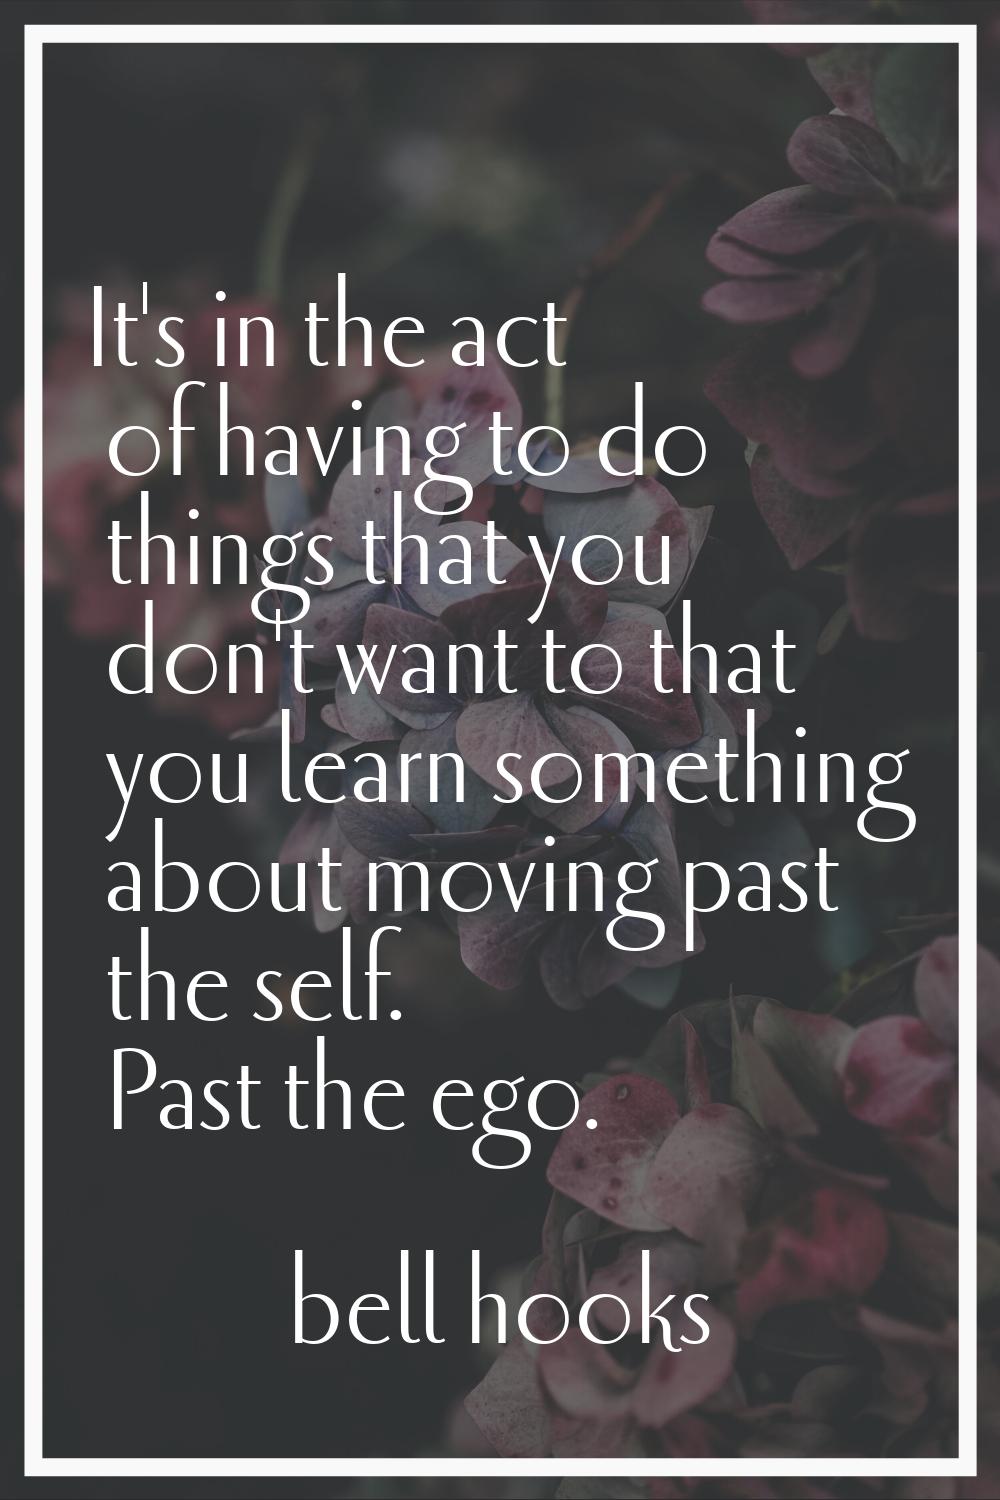 It's in the act of having to do things that you don't want to that you learn something about moving